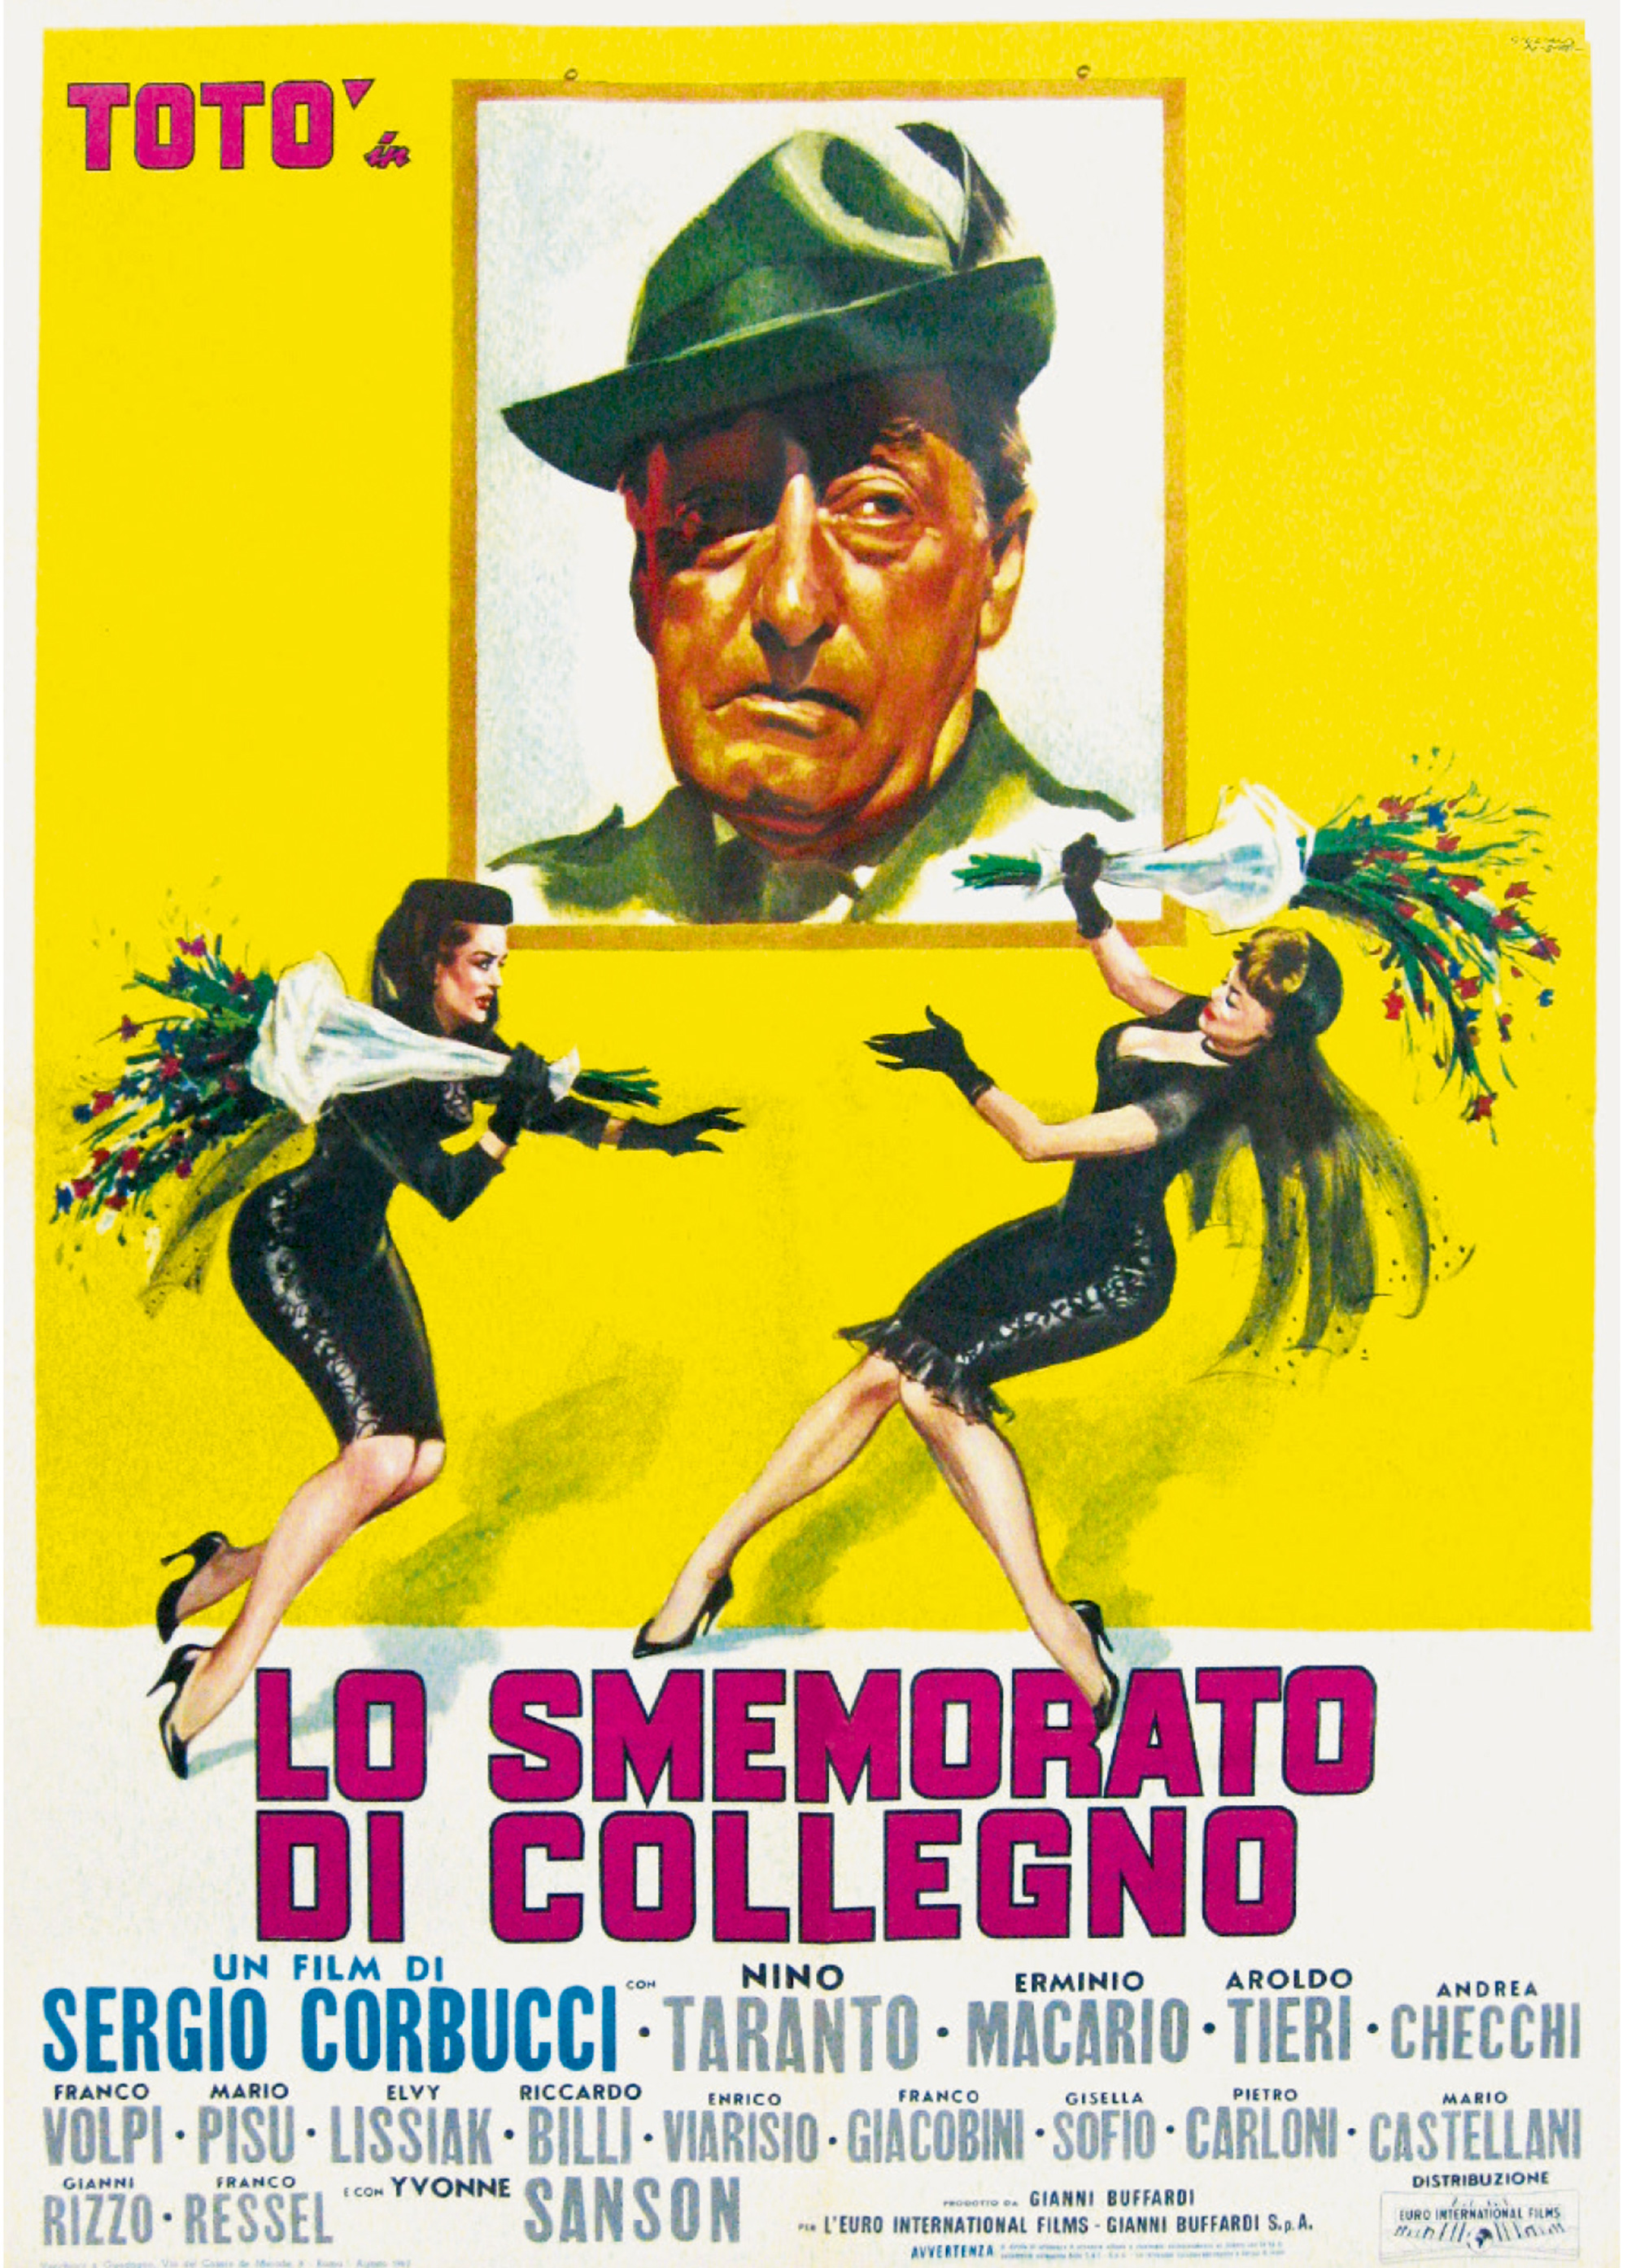 A promotional poster for the nineteen sixty-two film, “Lo Smemorato di Collegno.”